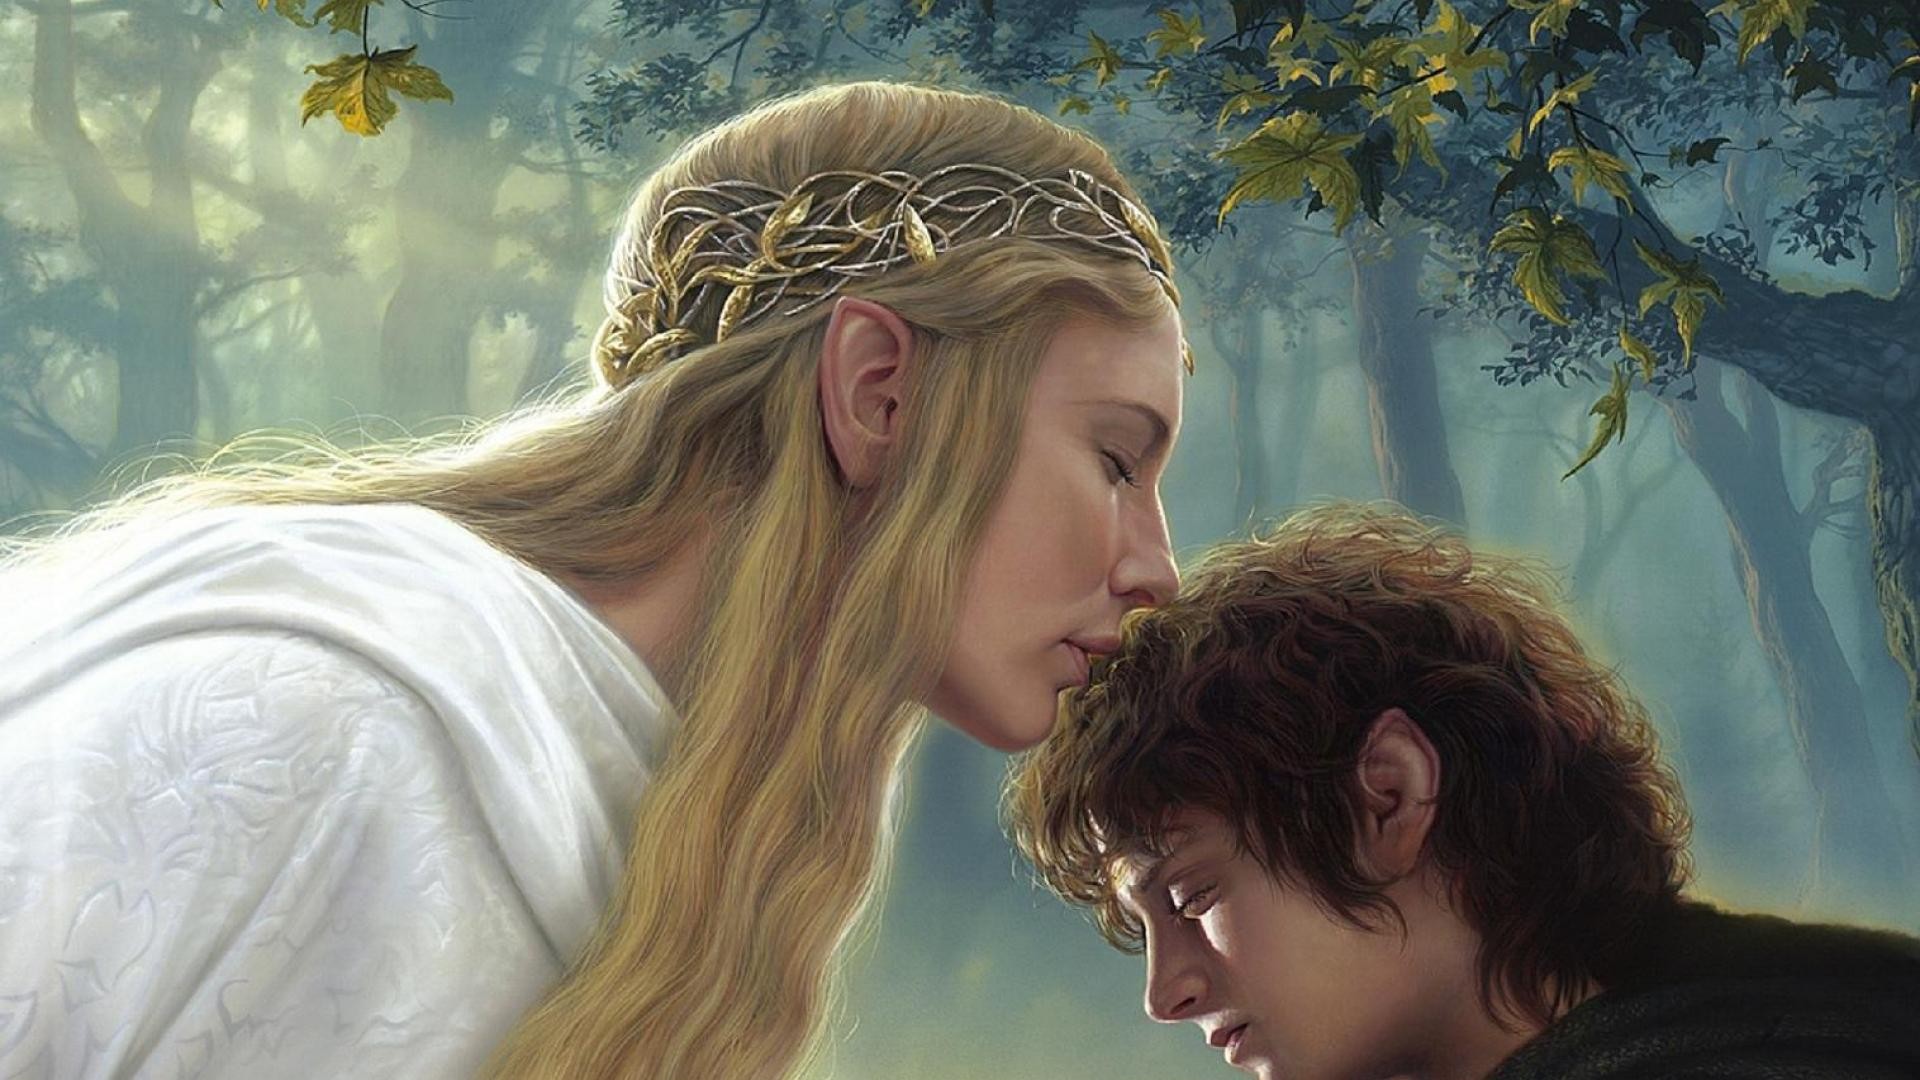 General 1920x1080 fantasy art movies The Lord of the Rings Galadriel Frodo Baggins fantasy girl fantasy men Cate Blanchett blonde women pointy ears closed eyes